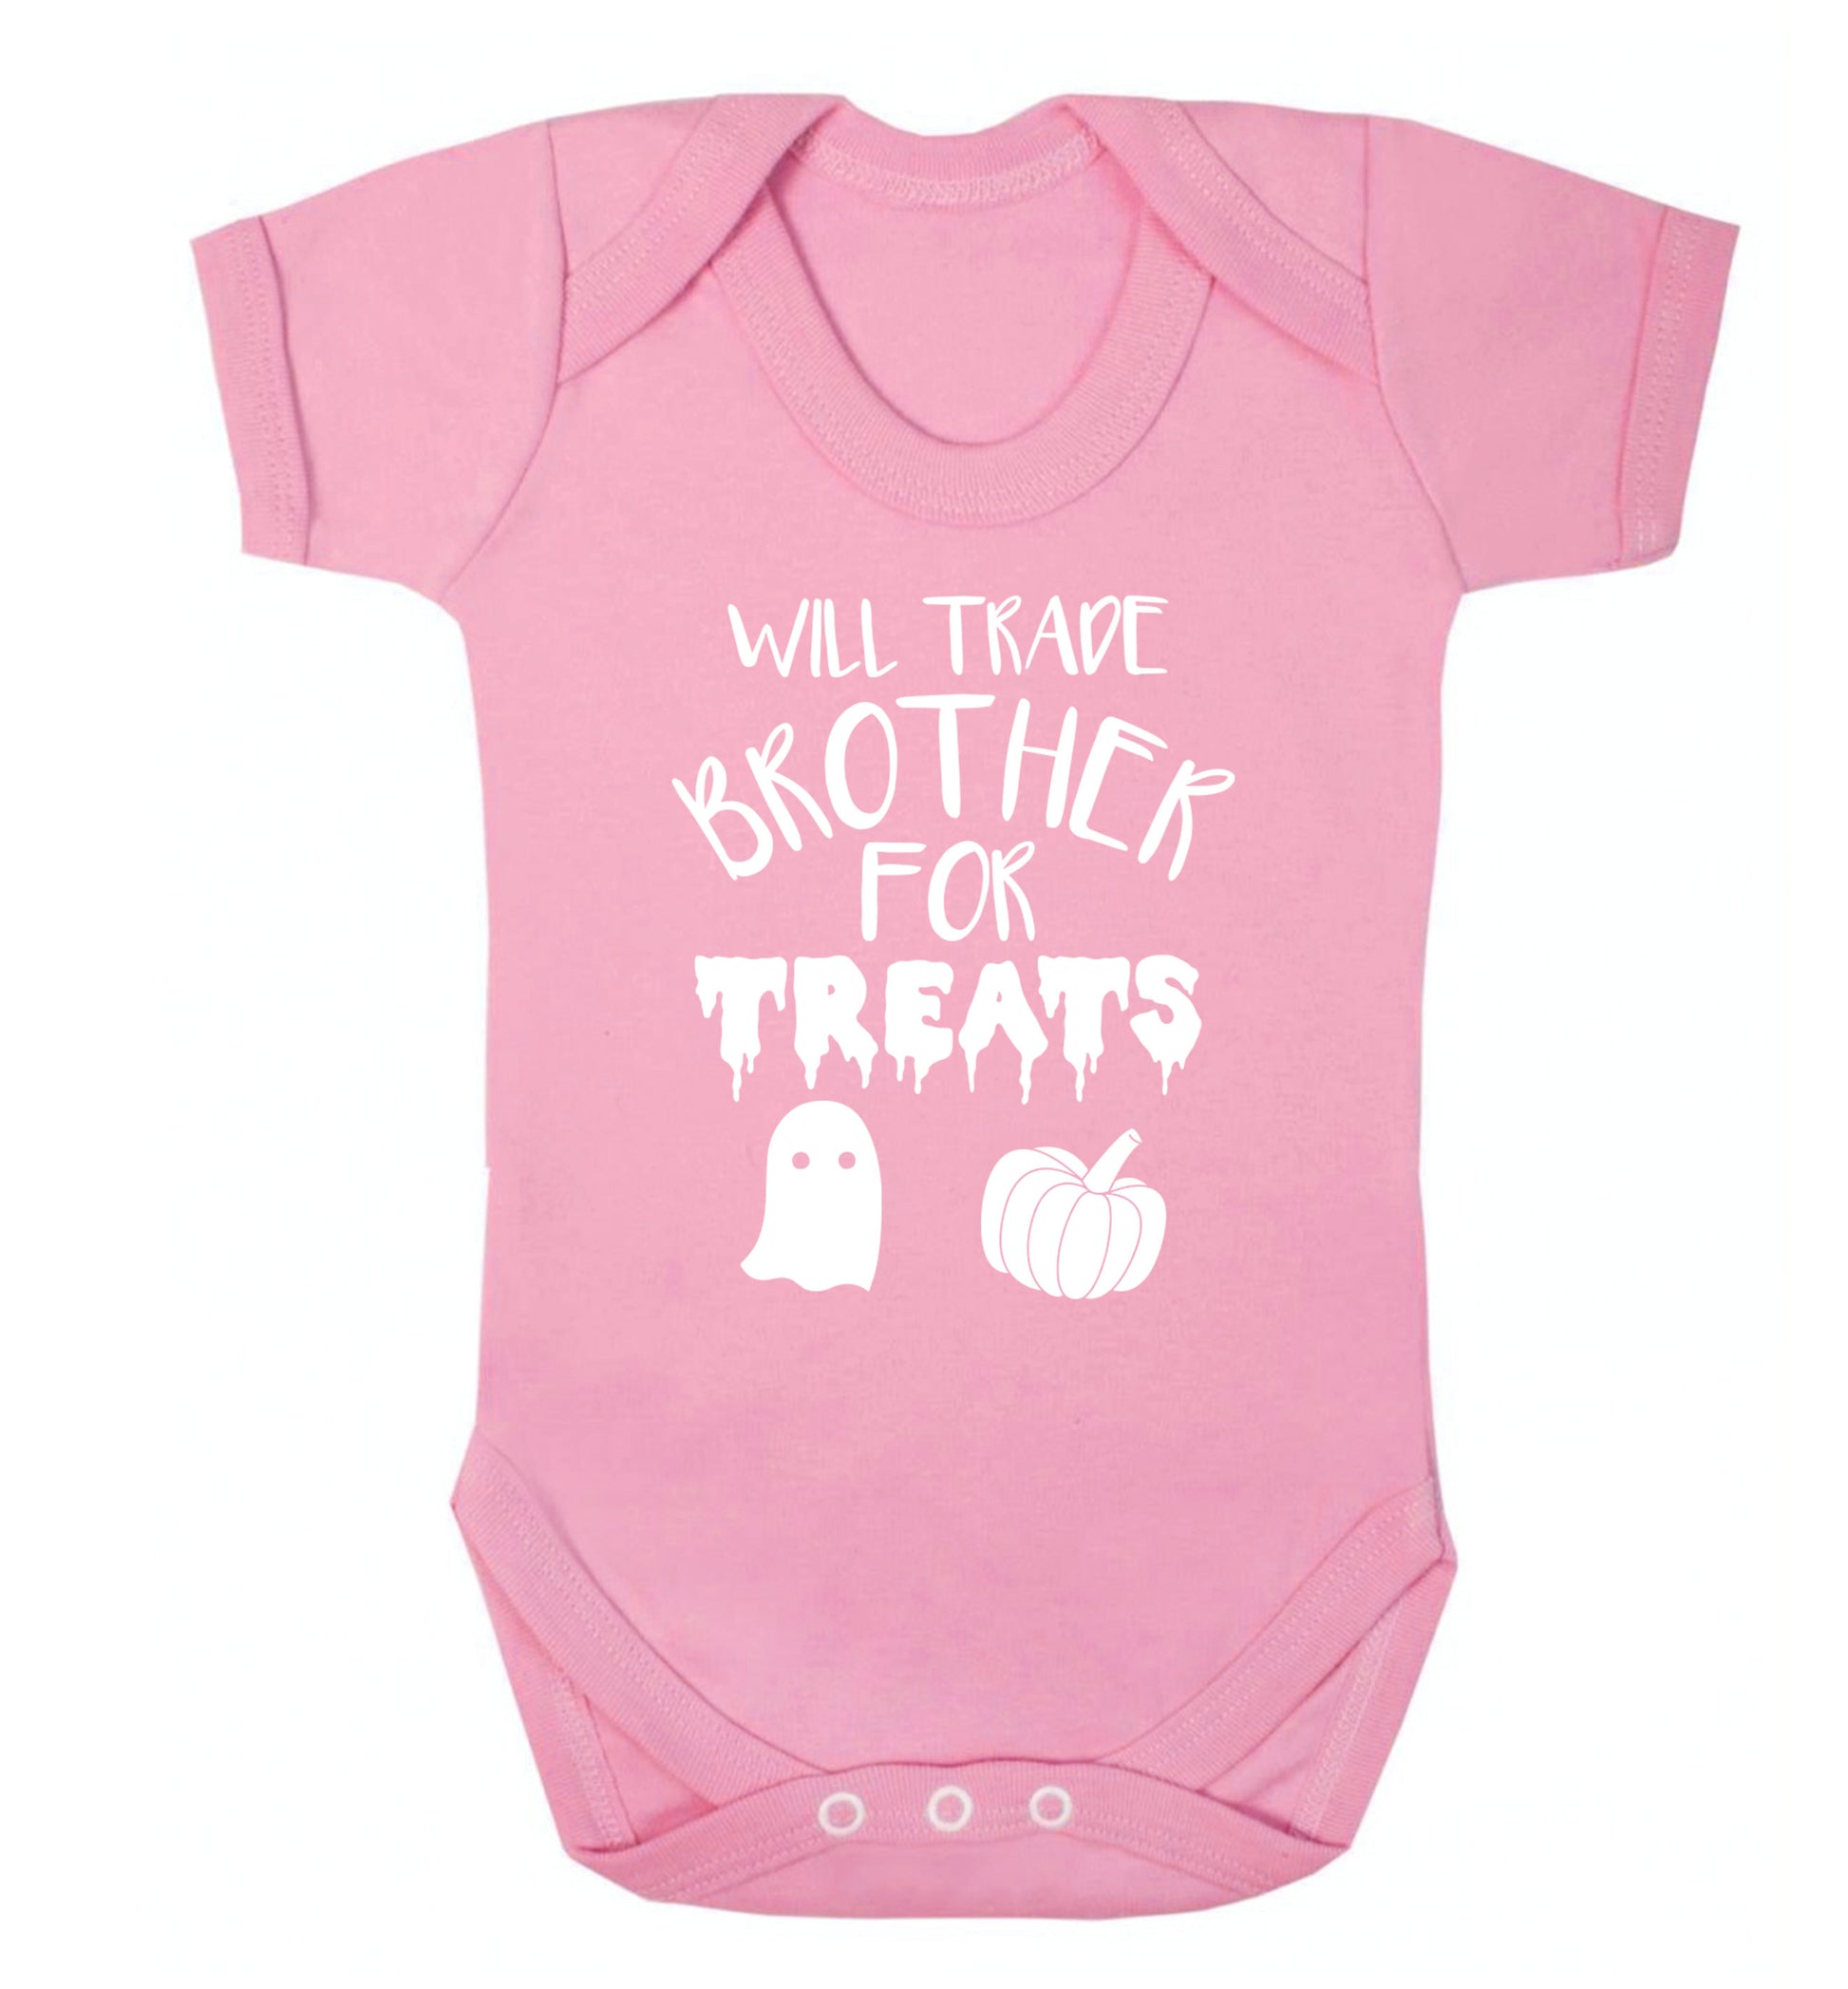 Will trade brother for treats Baby Vest pale pink 18-24 months